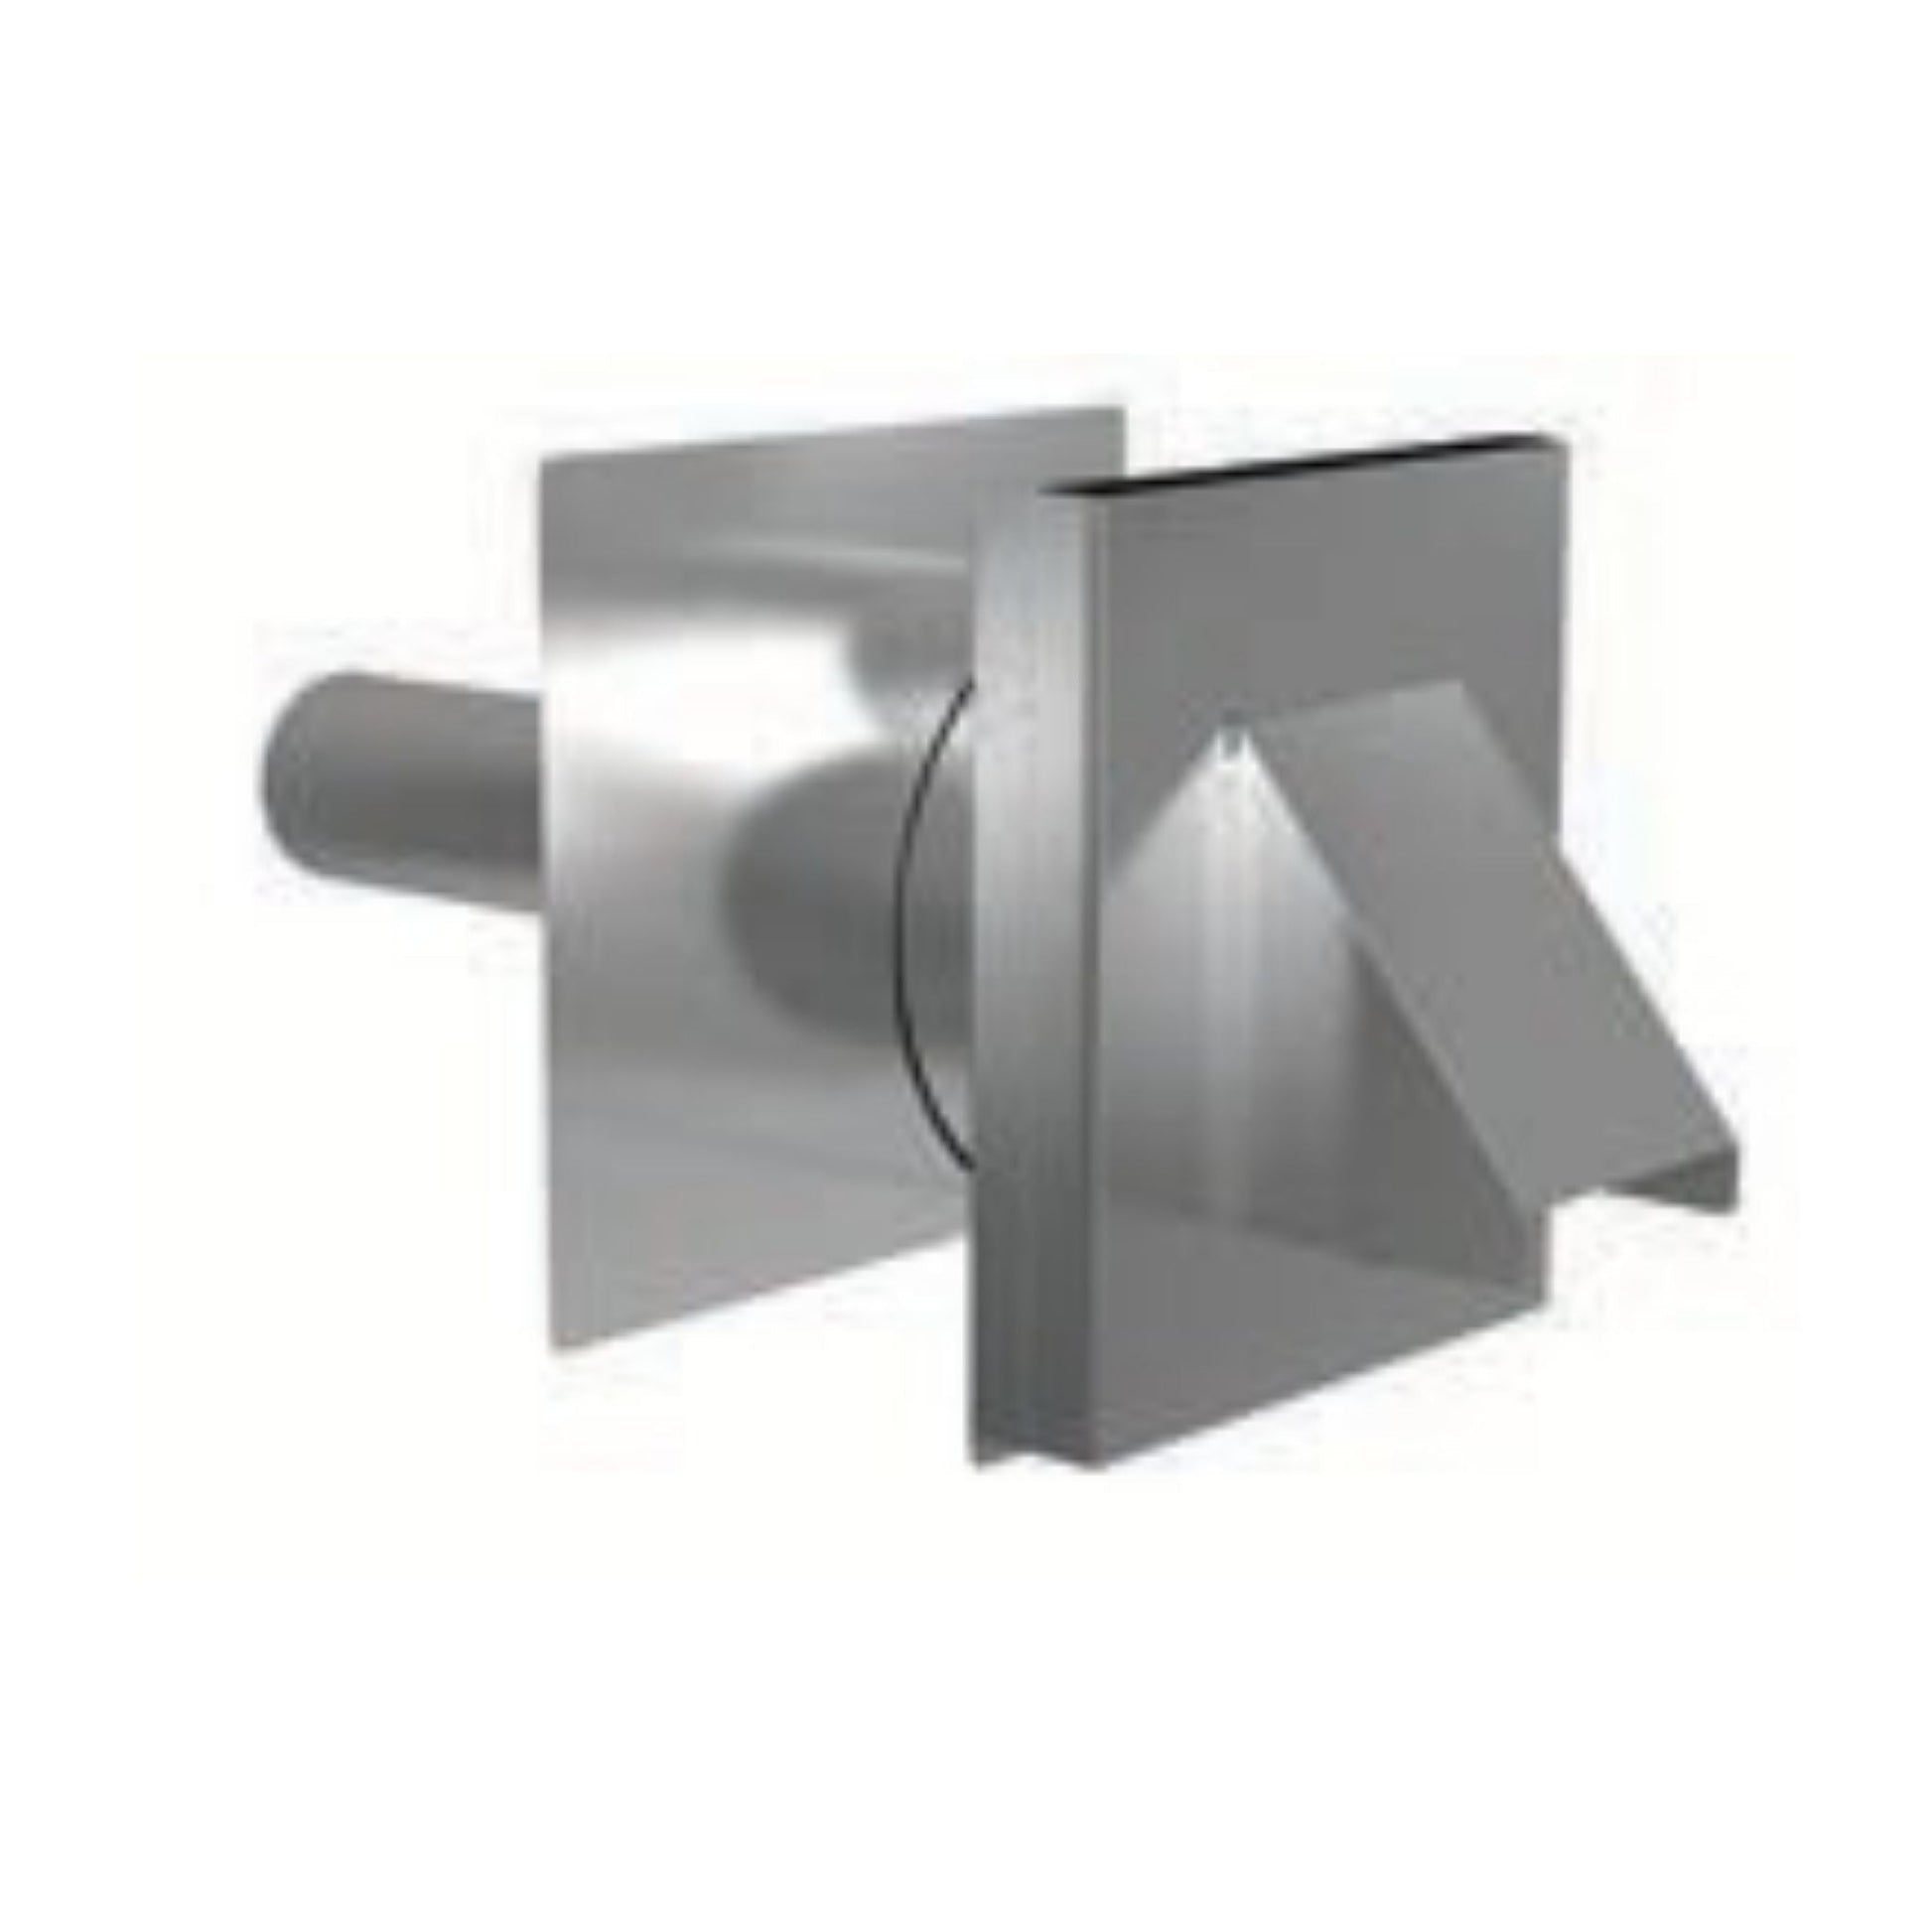 DuraVent FasNSeal 4" 29-4C Stainless Steel Insulated Wall Thimble With Termination Damper